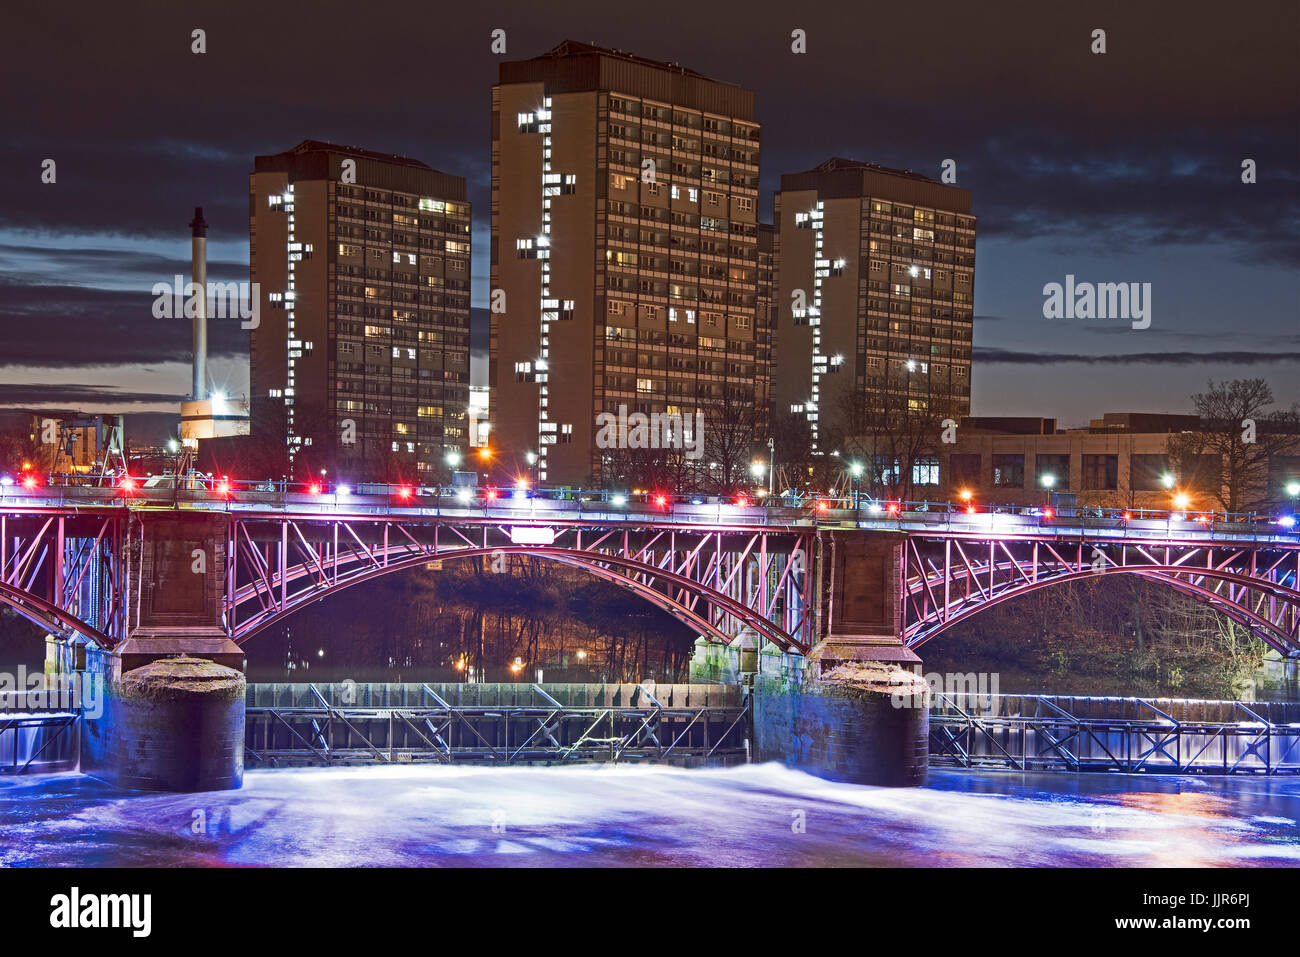 Night photograph taken from the Albery Bridge in Glasgow looking over to the illuminated Pipe Bridge and tidal weir in central Glasgow, Scotland. Stock Photo